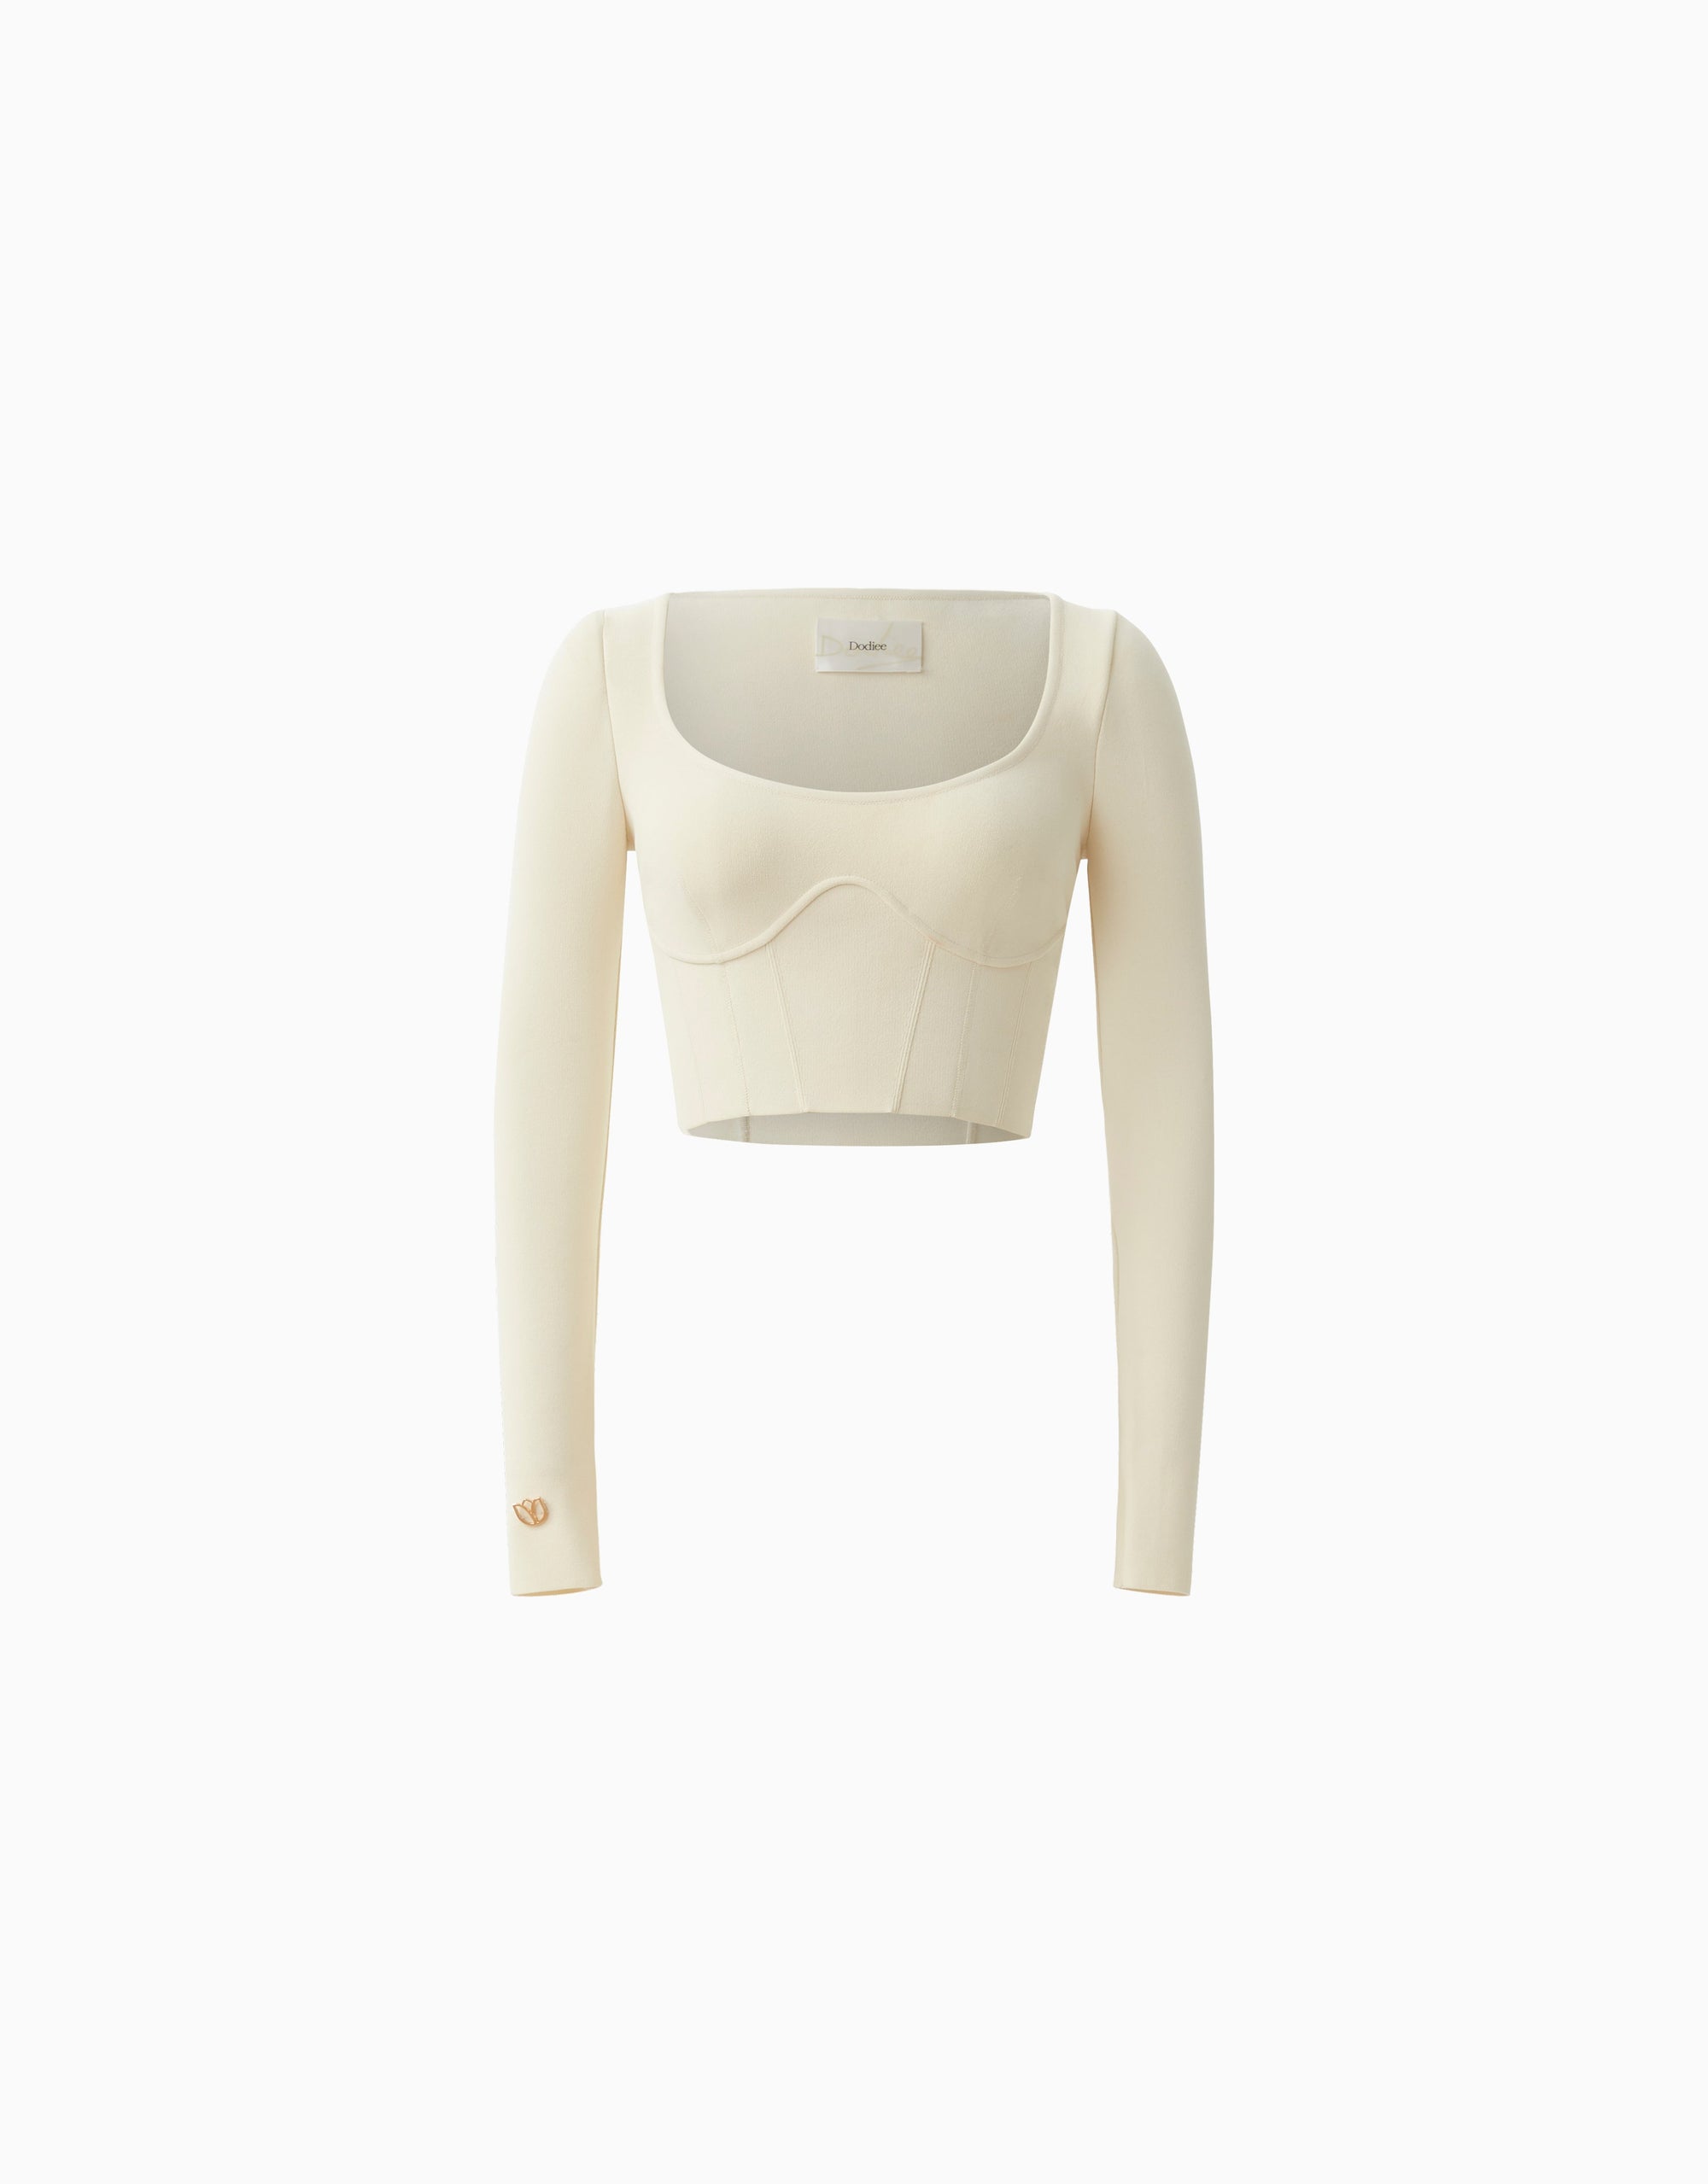 Sculpt knit long sleeve cropped top in cream